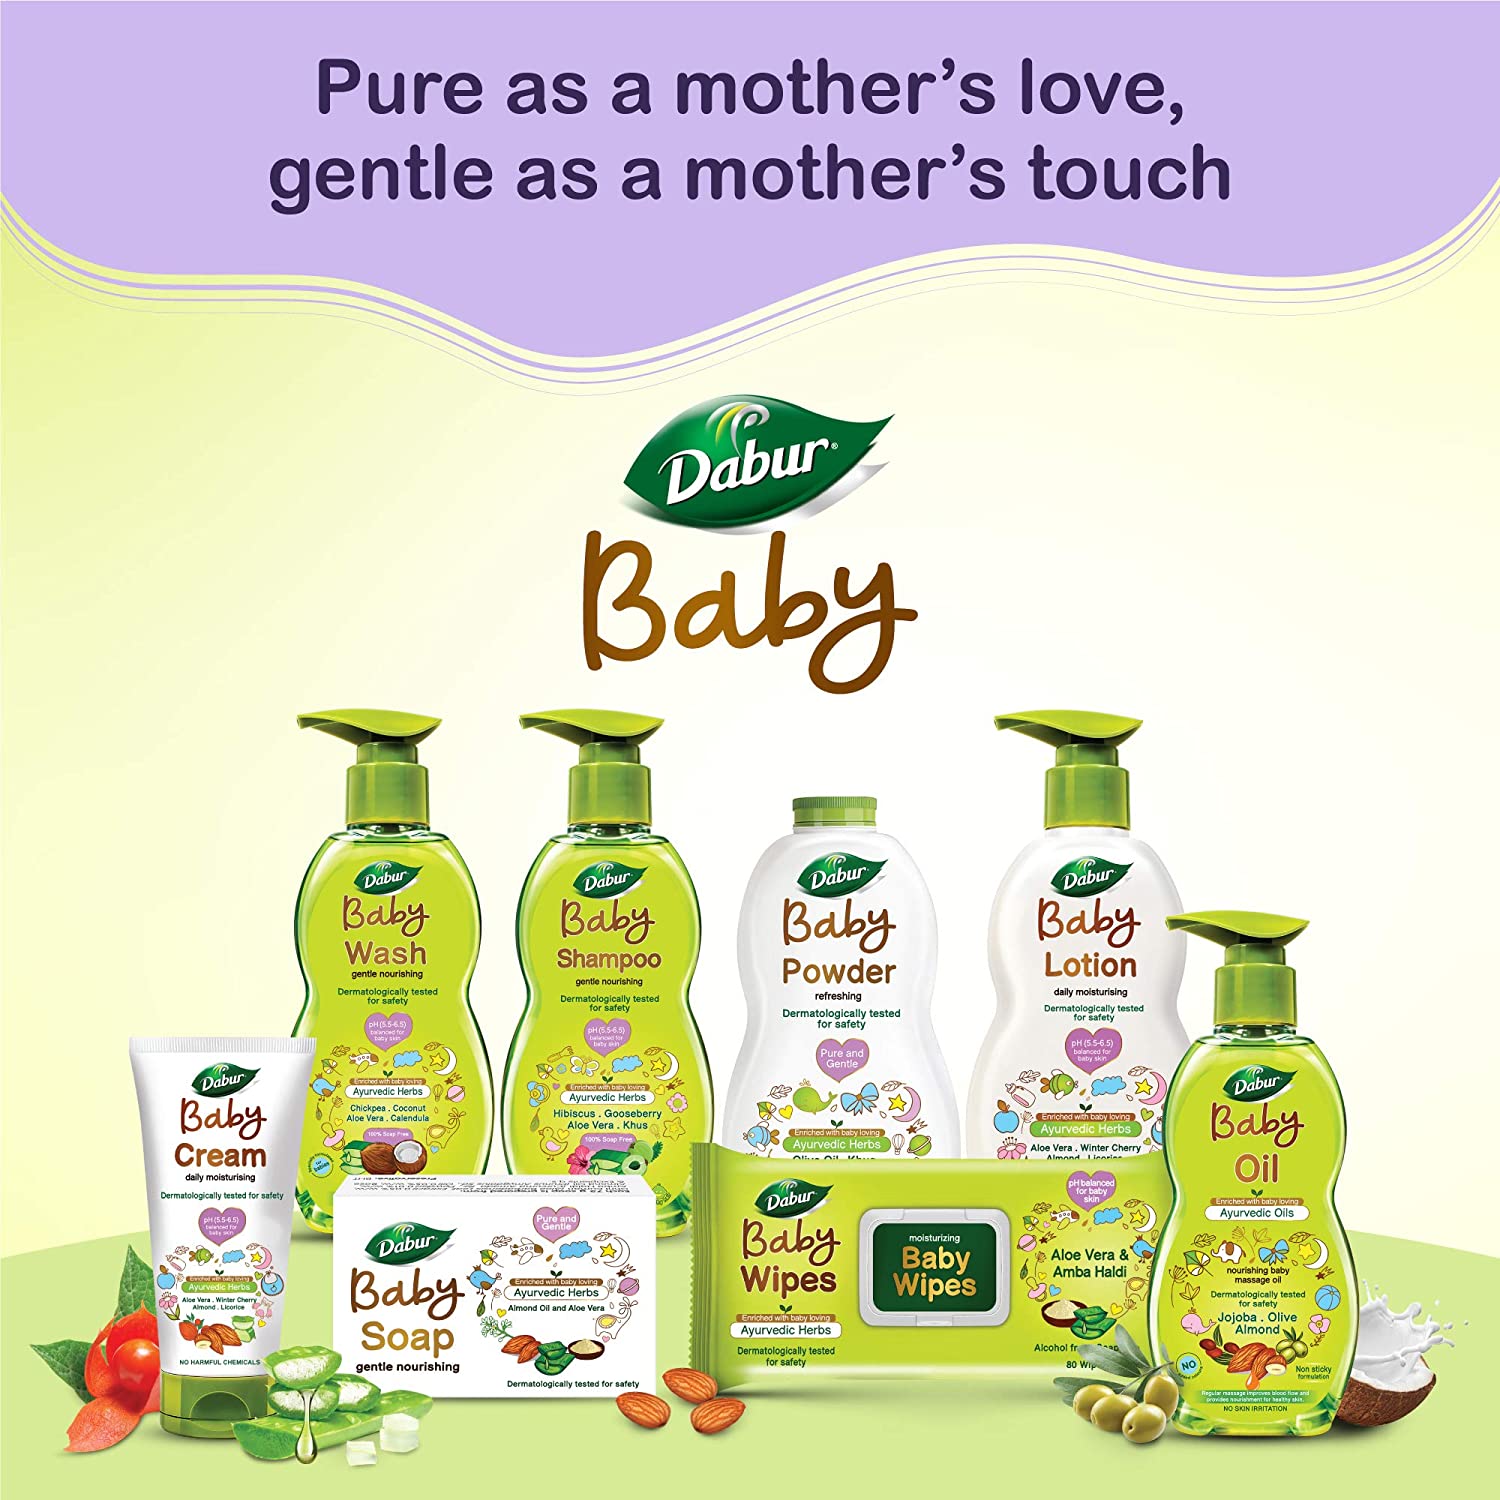 Dabur Baby Soap For Baby's Sensitive Skin with No Harmful Chemicals  Contains Aloe Vera & Almond Oil Hypoallergenic & Dermatologically Tested  with No Paraben & Phthalates - 75g ( Pack of 4) 